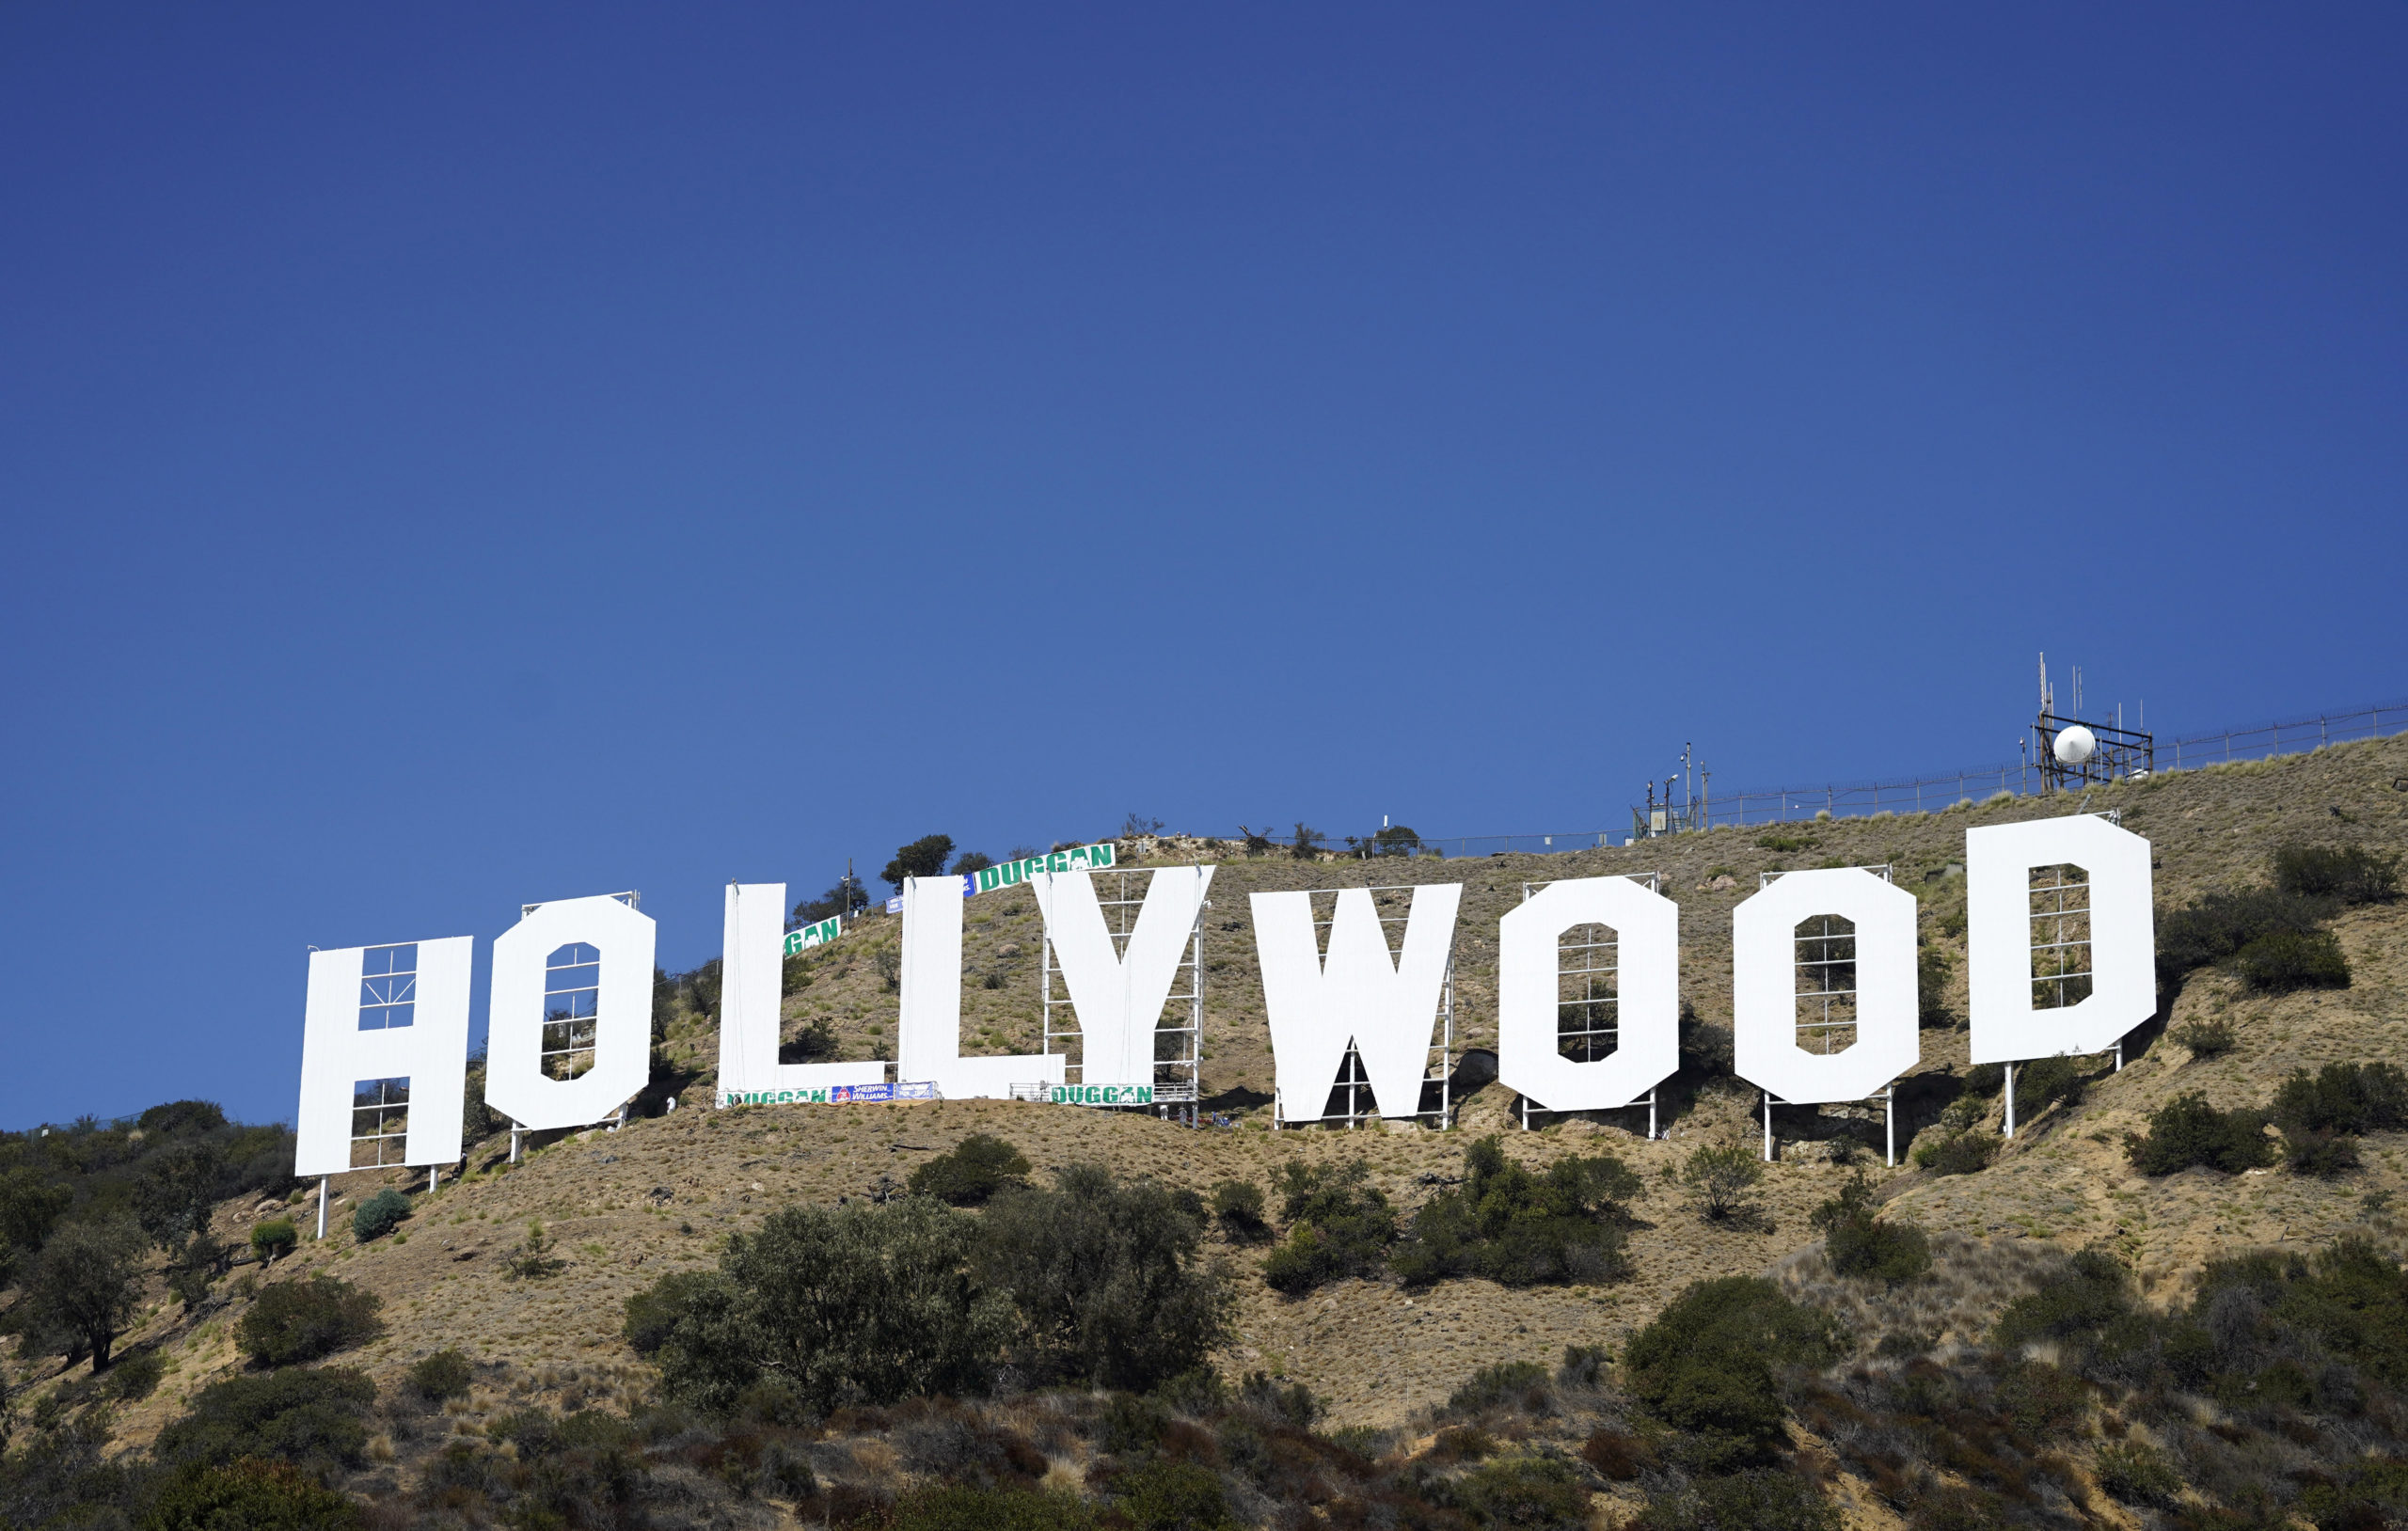 The Hollywood sign in Los Angeles, California, is pictured on Thursday.